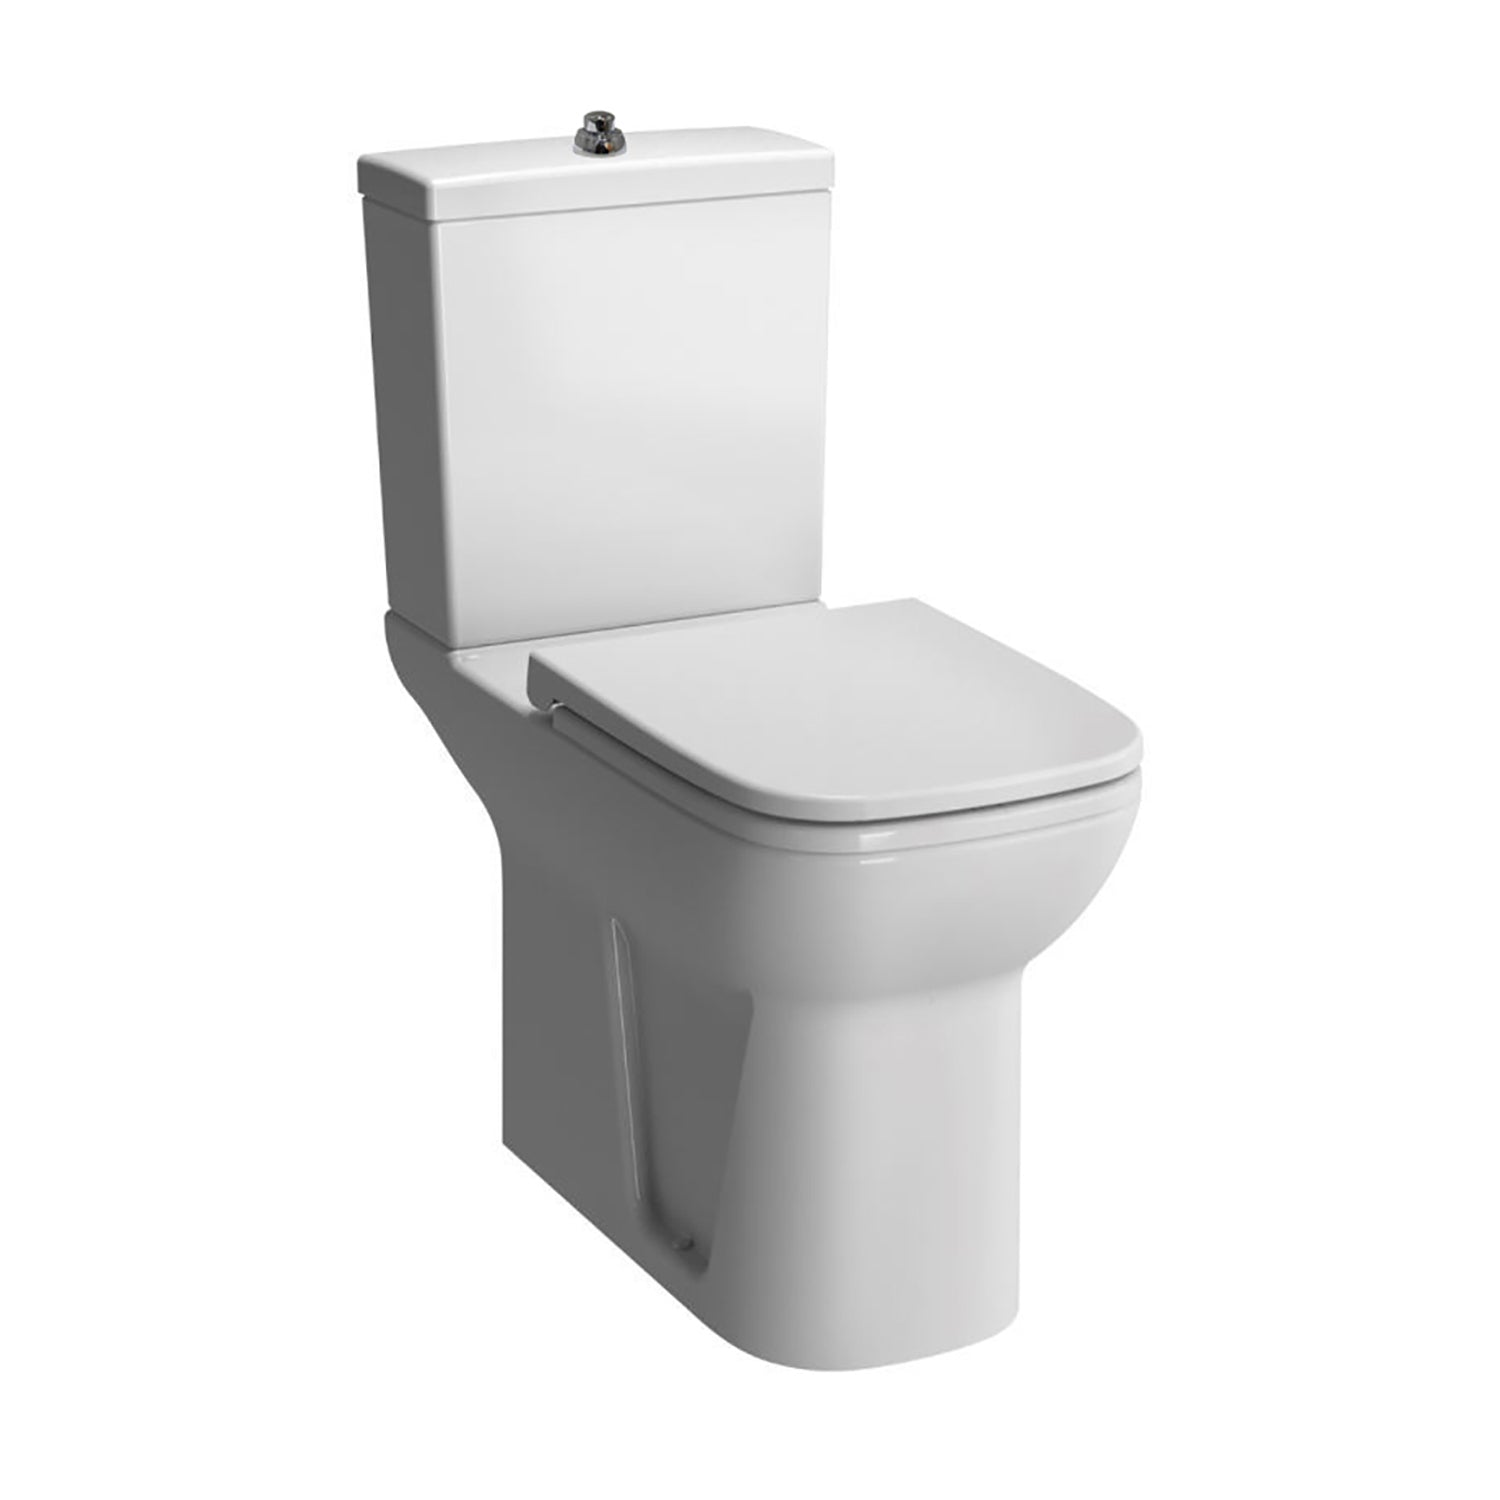 Consilio Comfort Height Close Coupled Toilet with the seat and cover on a white background